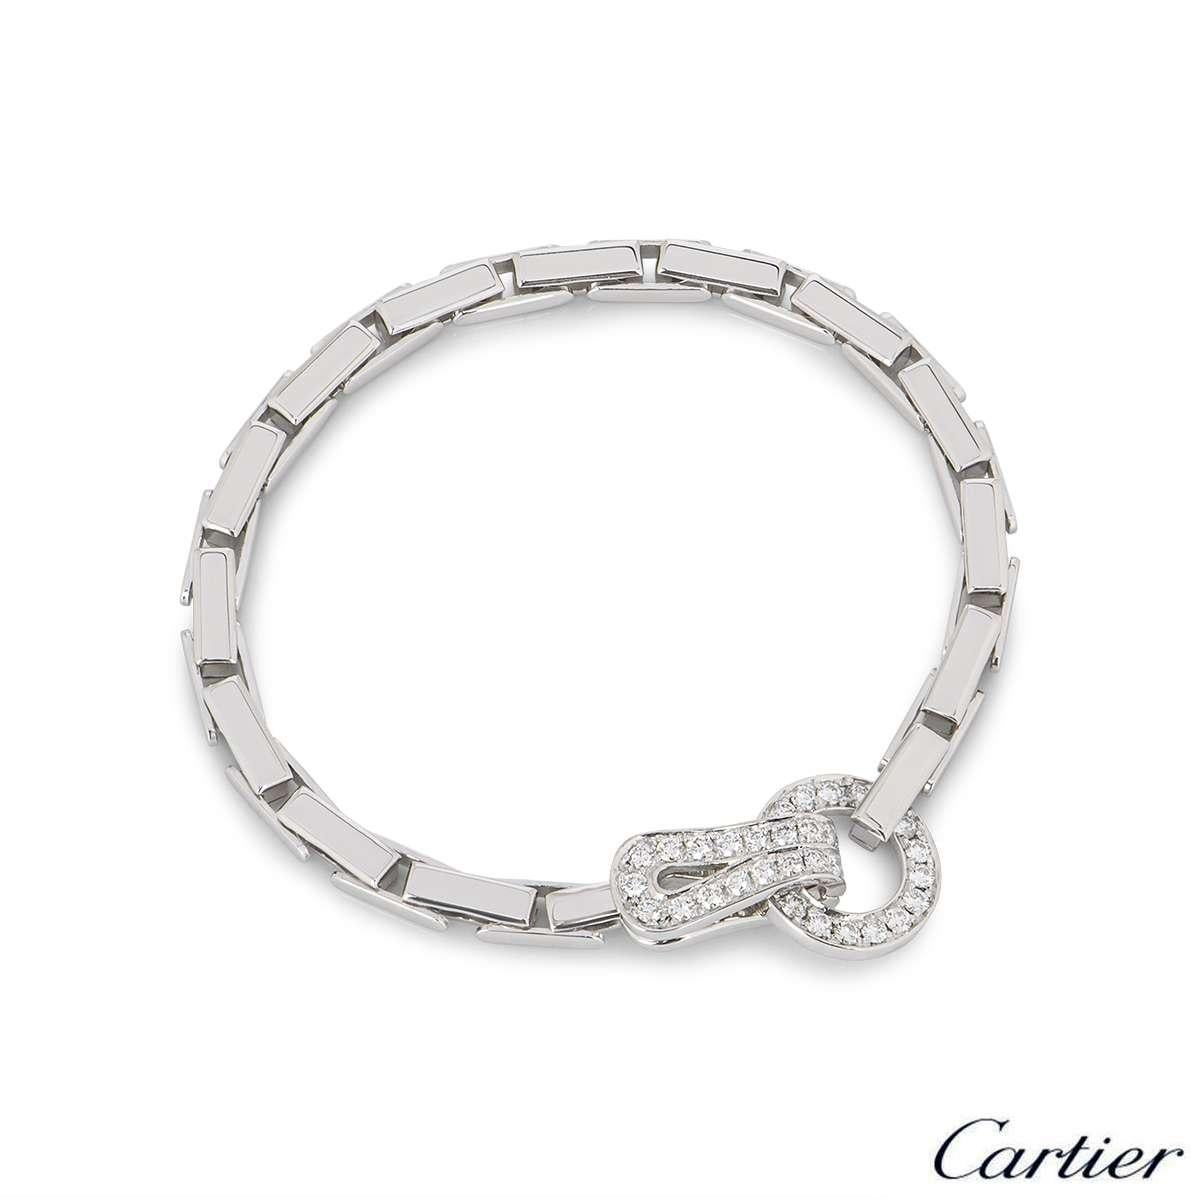 An 18k white gold bracelet by Cartier from the Agrafe collection. The bracelet features the classic openwork Agrafe diamond set motif connected by brick style links. There are 35 round brilliant cut diamonds with a total weight of approximately